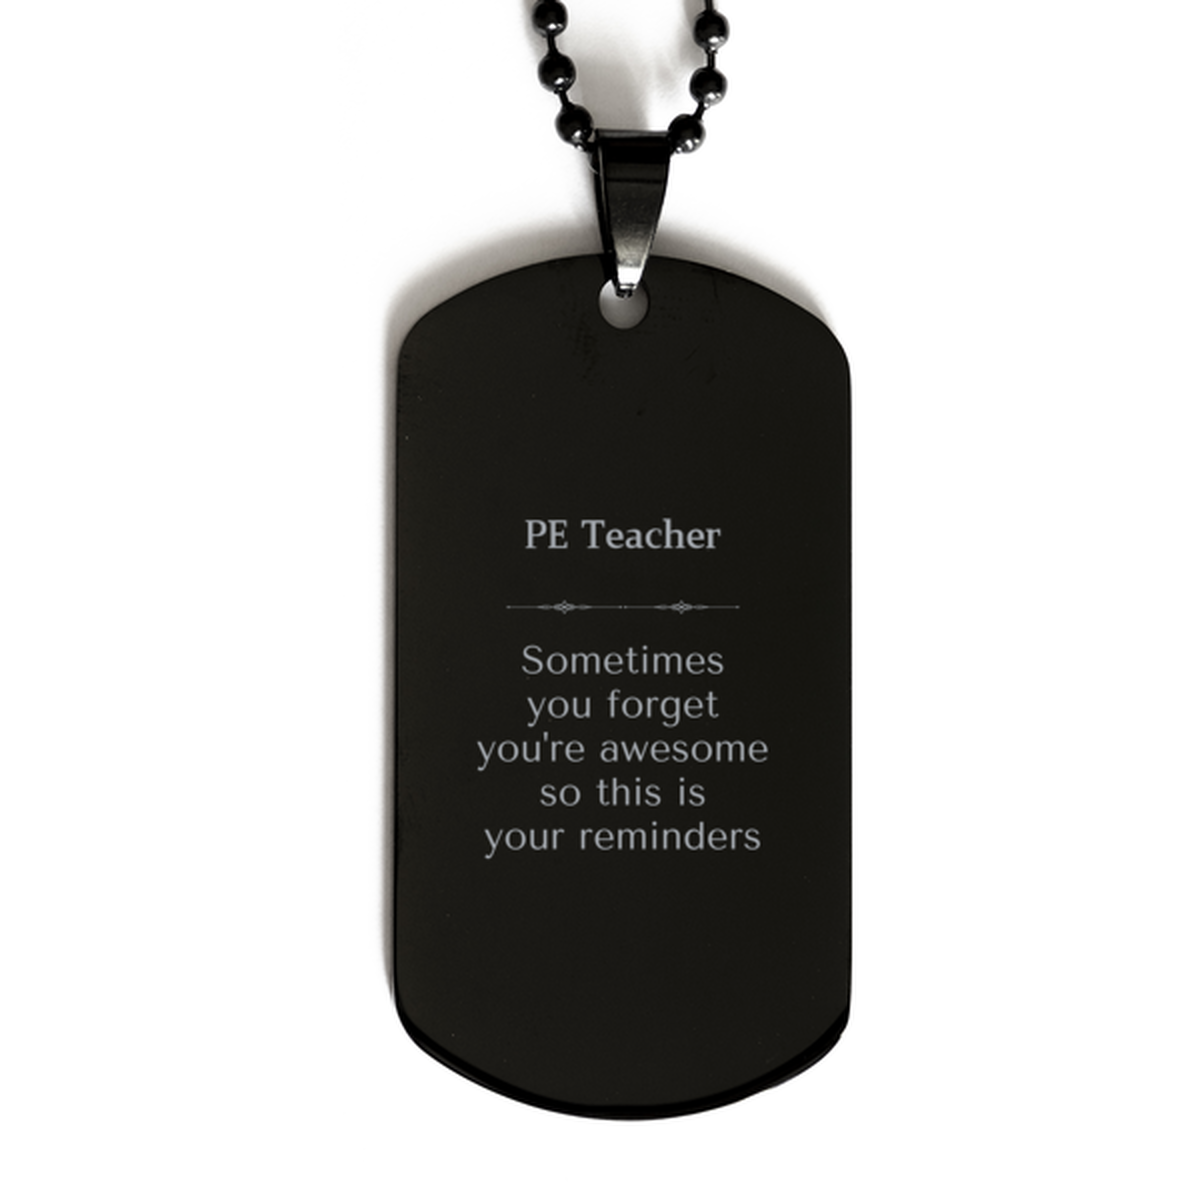 Sentimental PE Teacher Black Dog Tag, PE Teacher Sometimes you forget you're awesome so this is your reminders, Graduation Christmas Birthday Gifts for PE Teacher, Men, Women, Coworkers